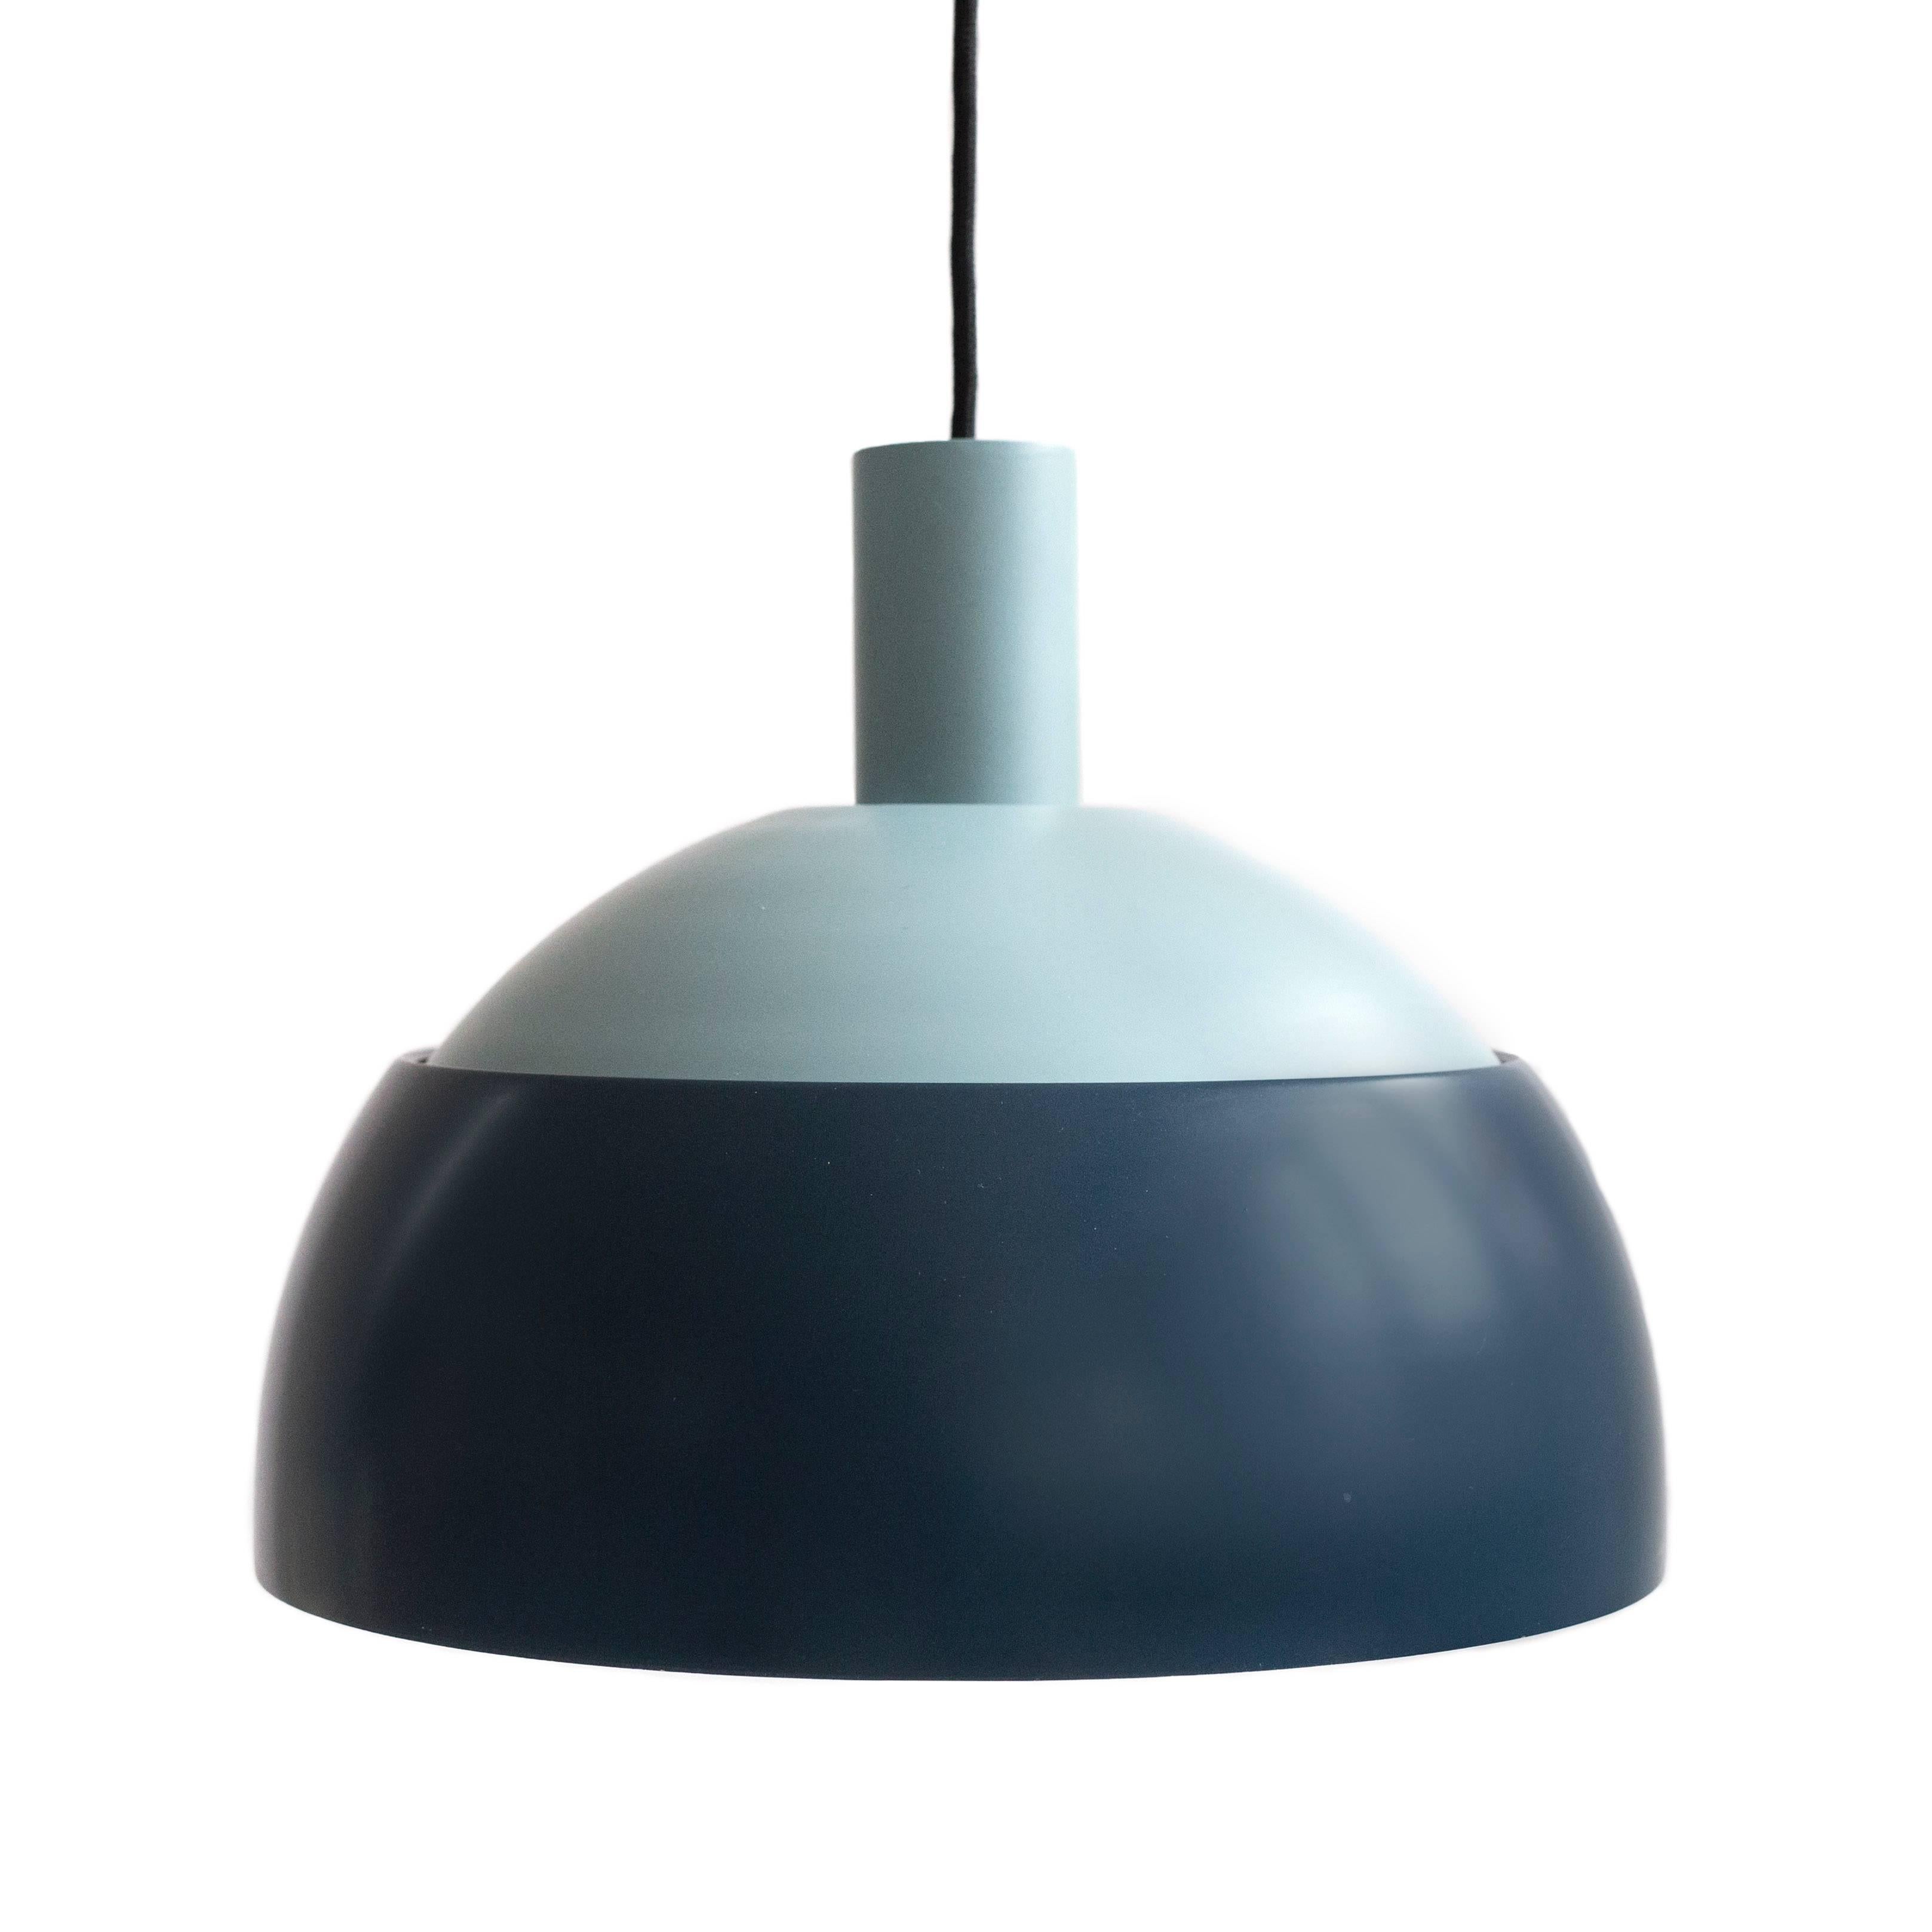 Large size Finn Juhl pendant. 

Designed 1963, manufactured during approximately 7 years at Lyfa, Denmark. 

Light blue and blue painted metal, adjustable lower shade. Diameter 34 cm.

 